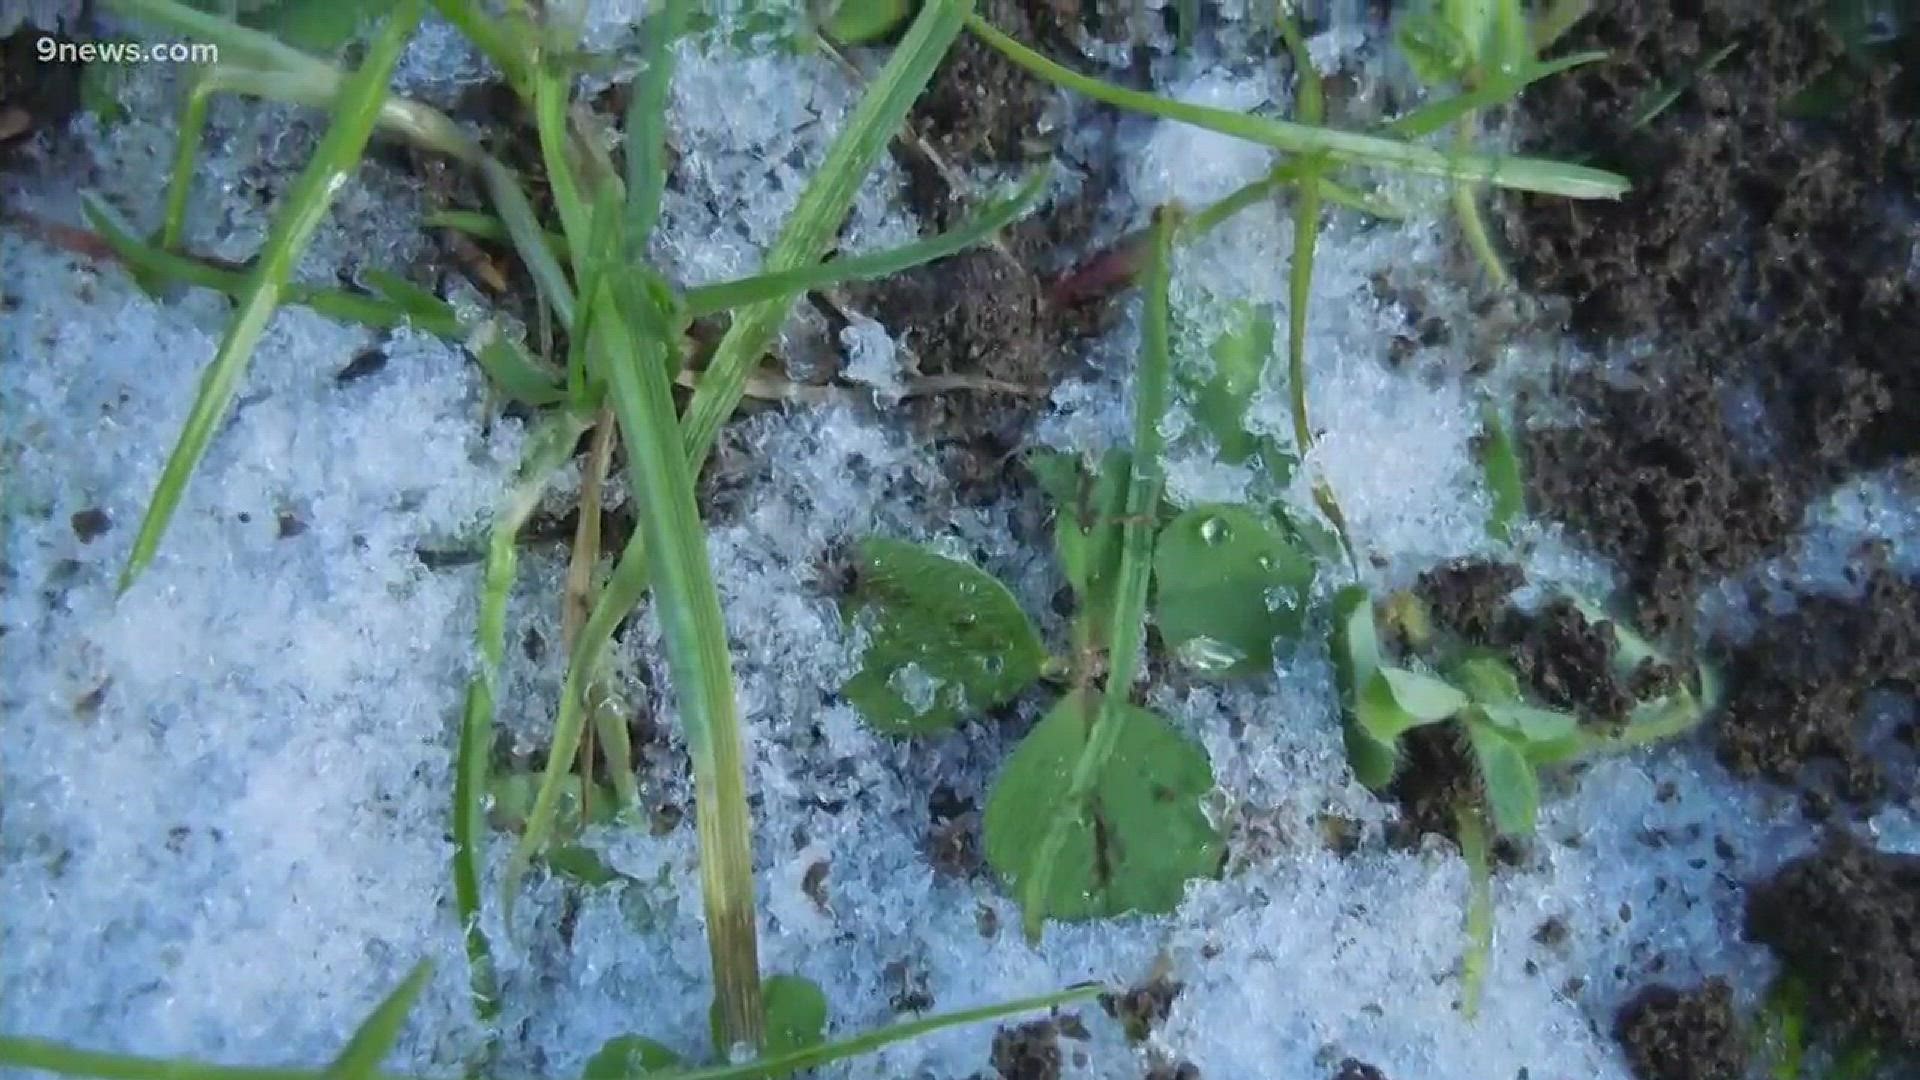 "Cover crops" are meant to help maintain and re-energize the soil. But one scientist from NCAR in Boulder has discovered that ground cover may be causing some unintentional warming.